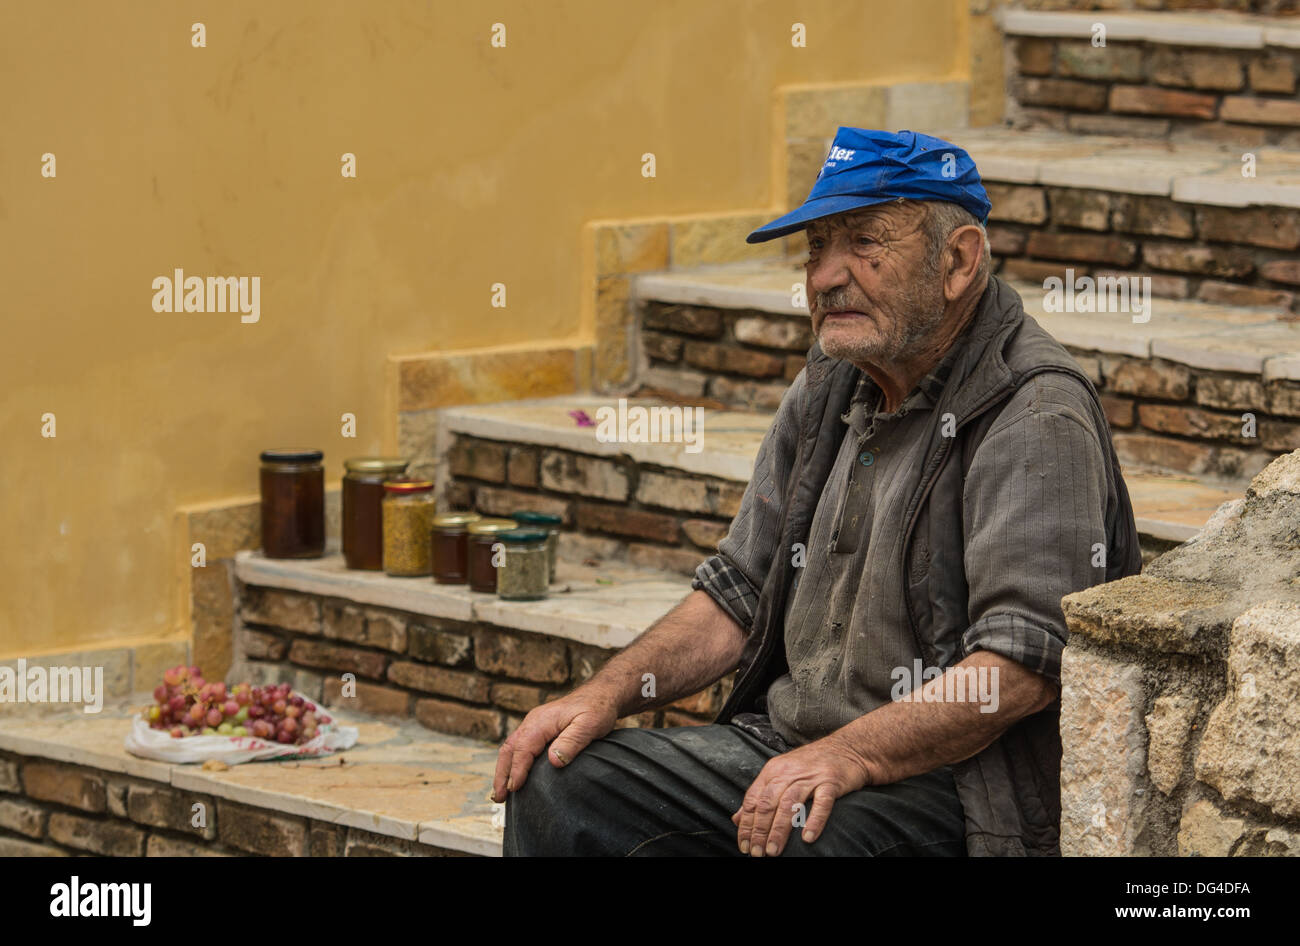 Old Tramp selling honey and grapes to tourists Stock Photo